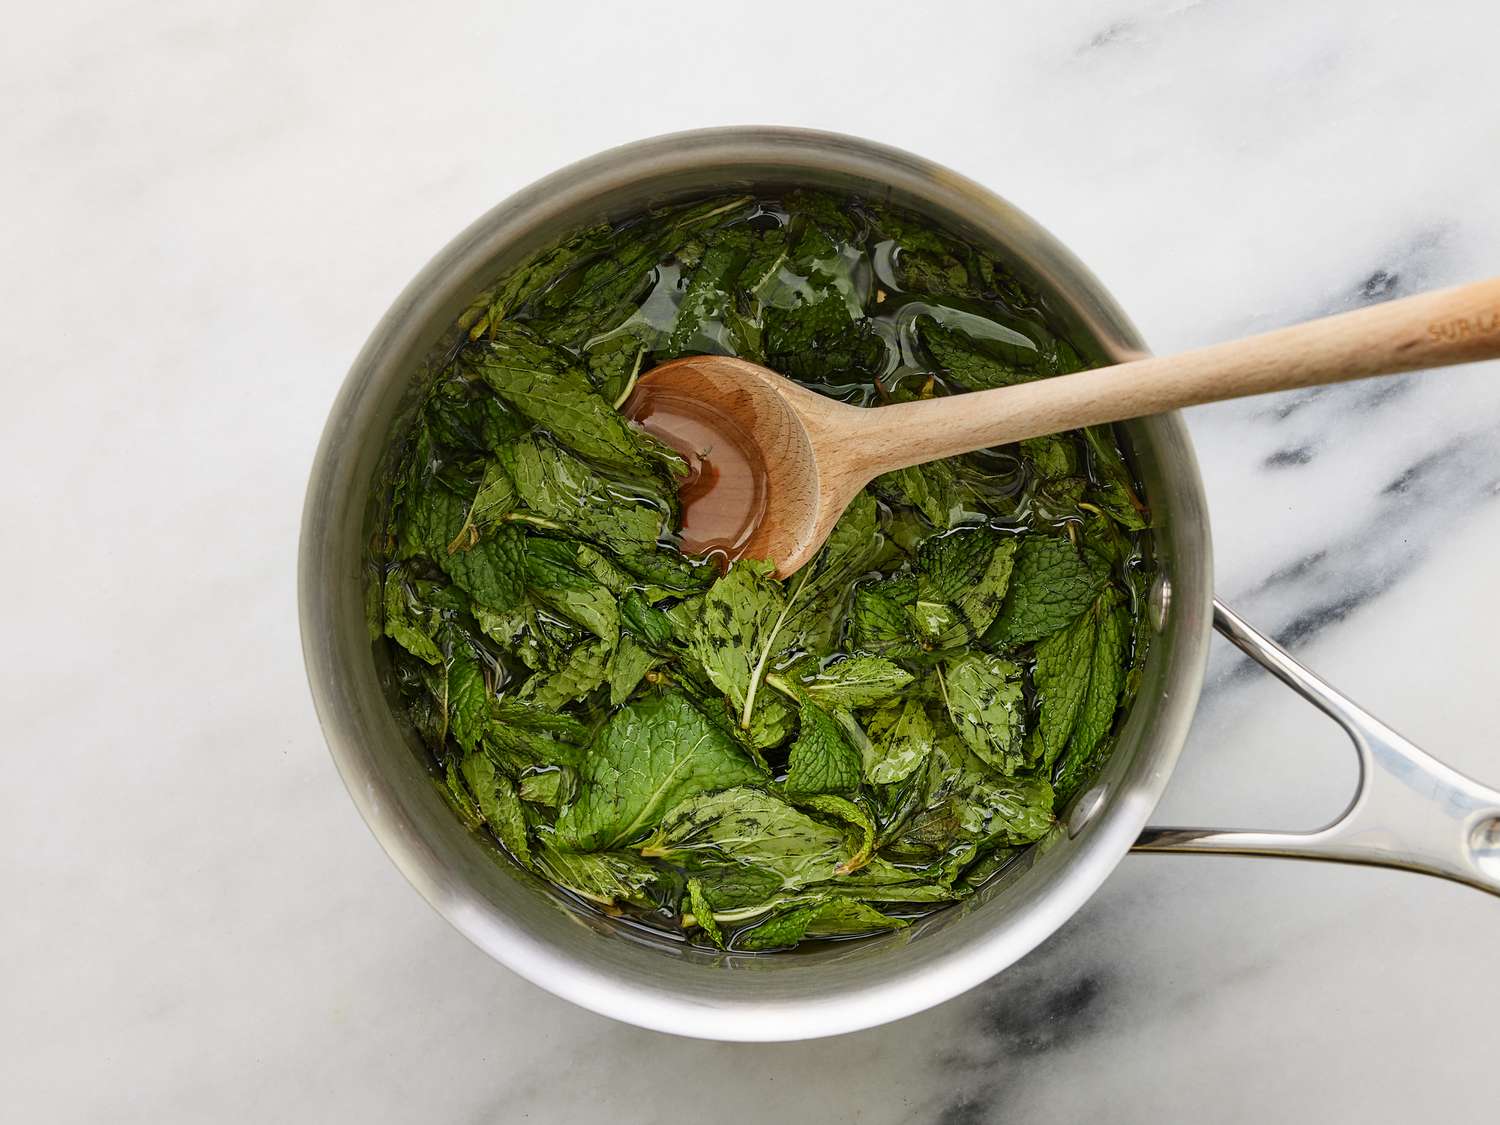 Yummy Home Scent! How to Use Boiling Mint Leaves for a Refreshing Atmosphere